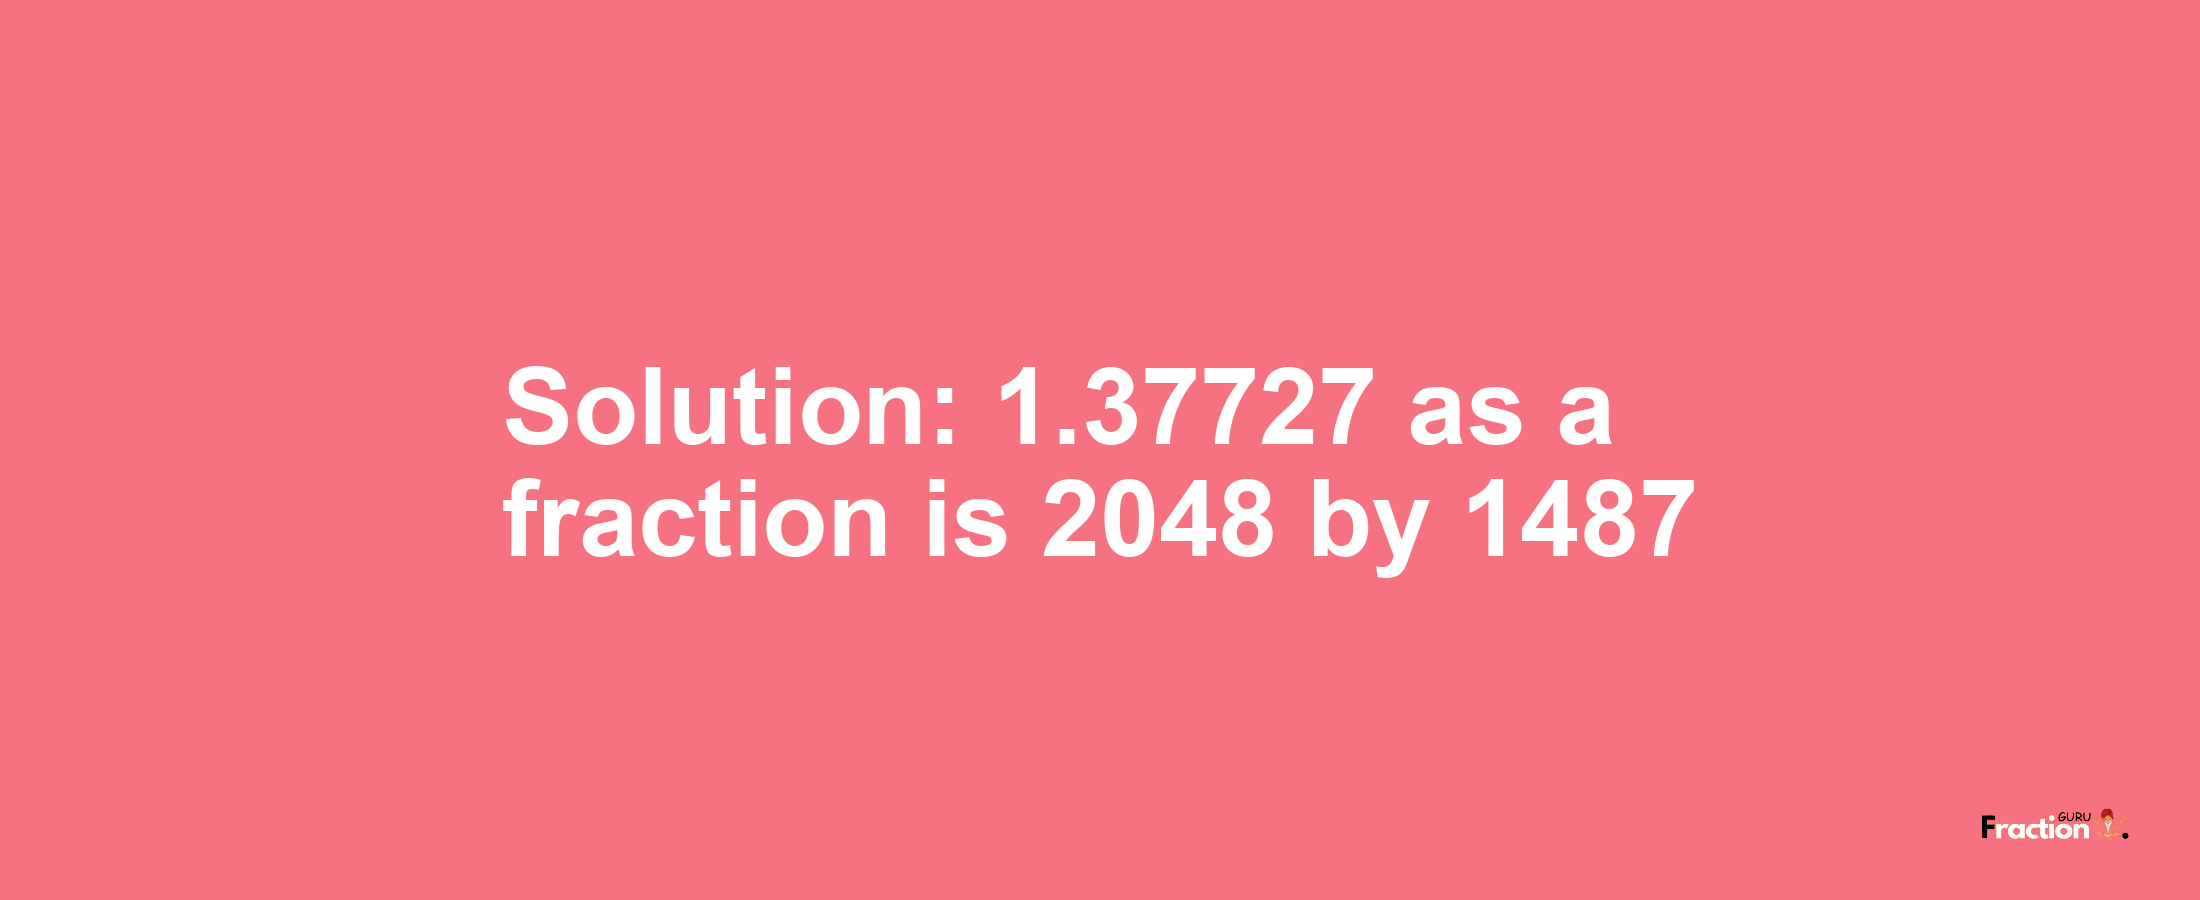 Solution:1.37727 as a fraction is 2048/1487